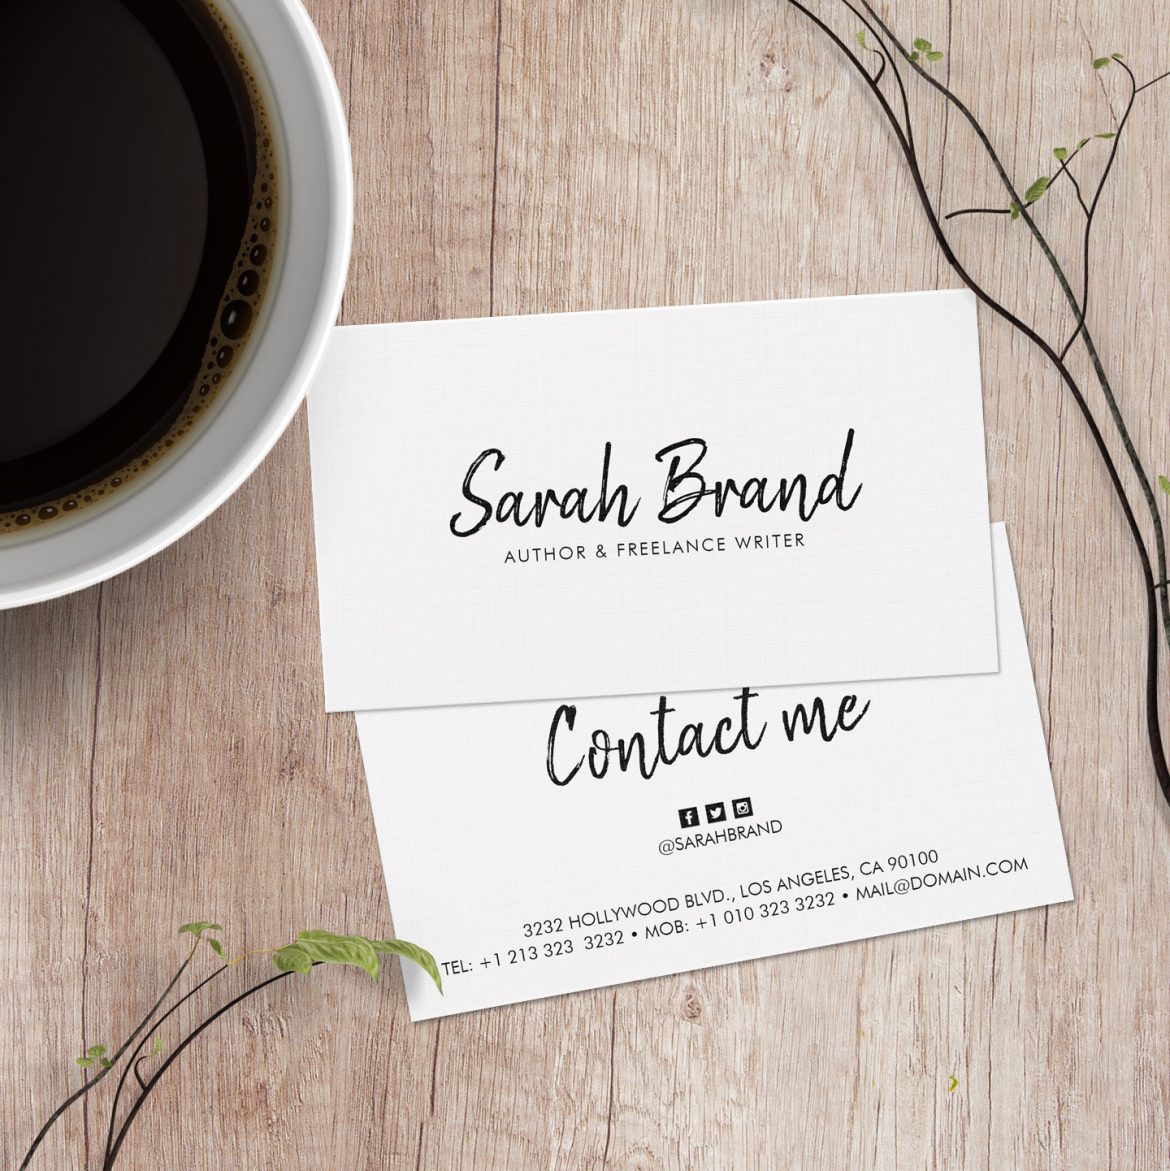 Modern Business Cards – Find the Right Design for Your Business